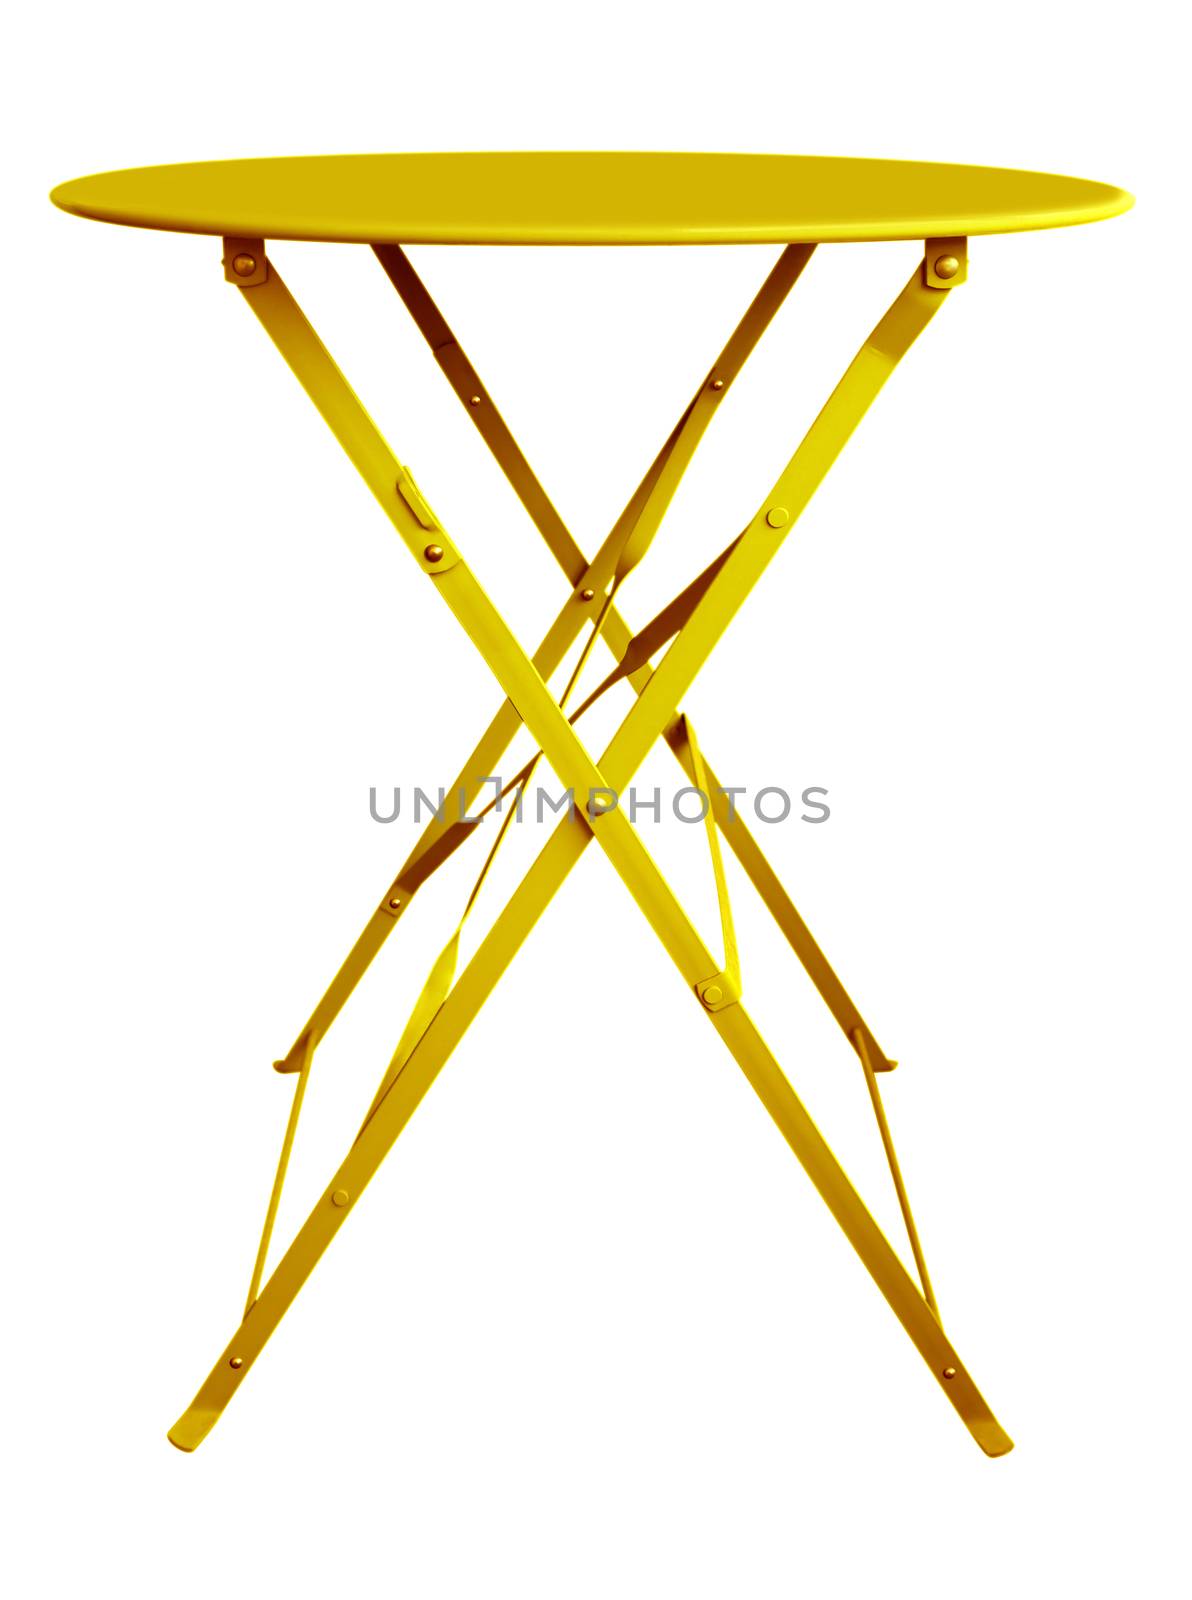 Yellow Folding Table isolated on white, with clipping path.